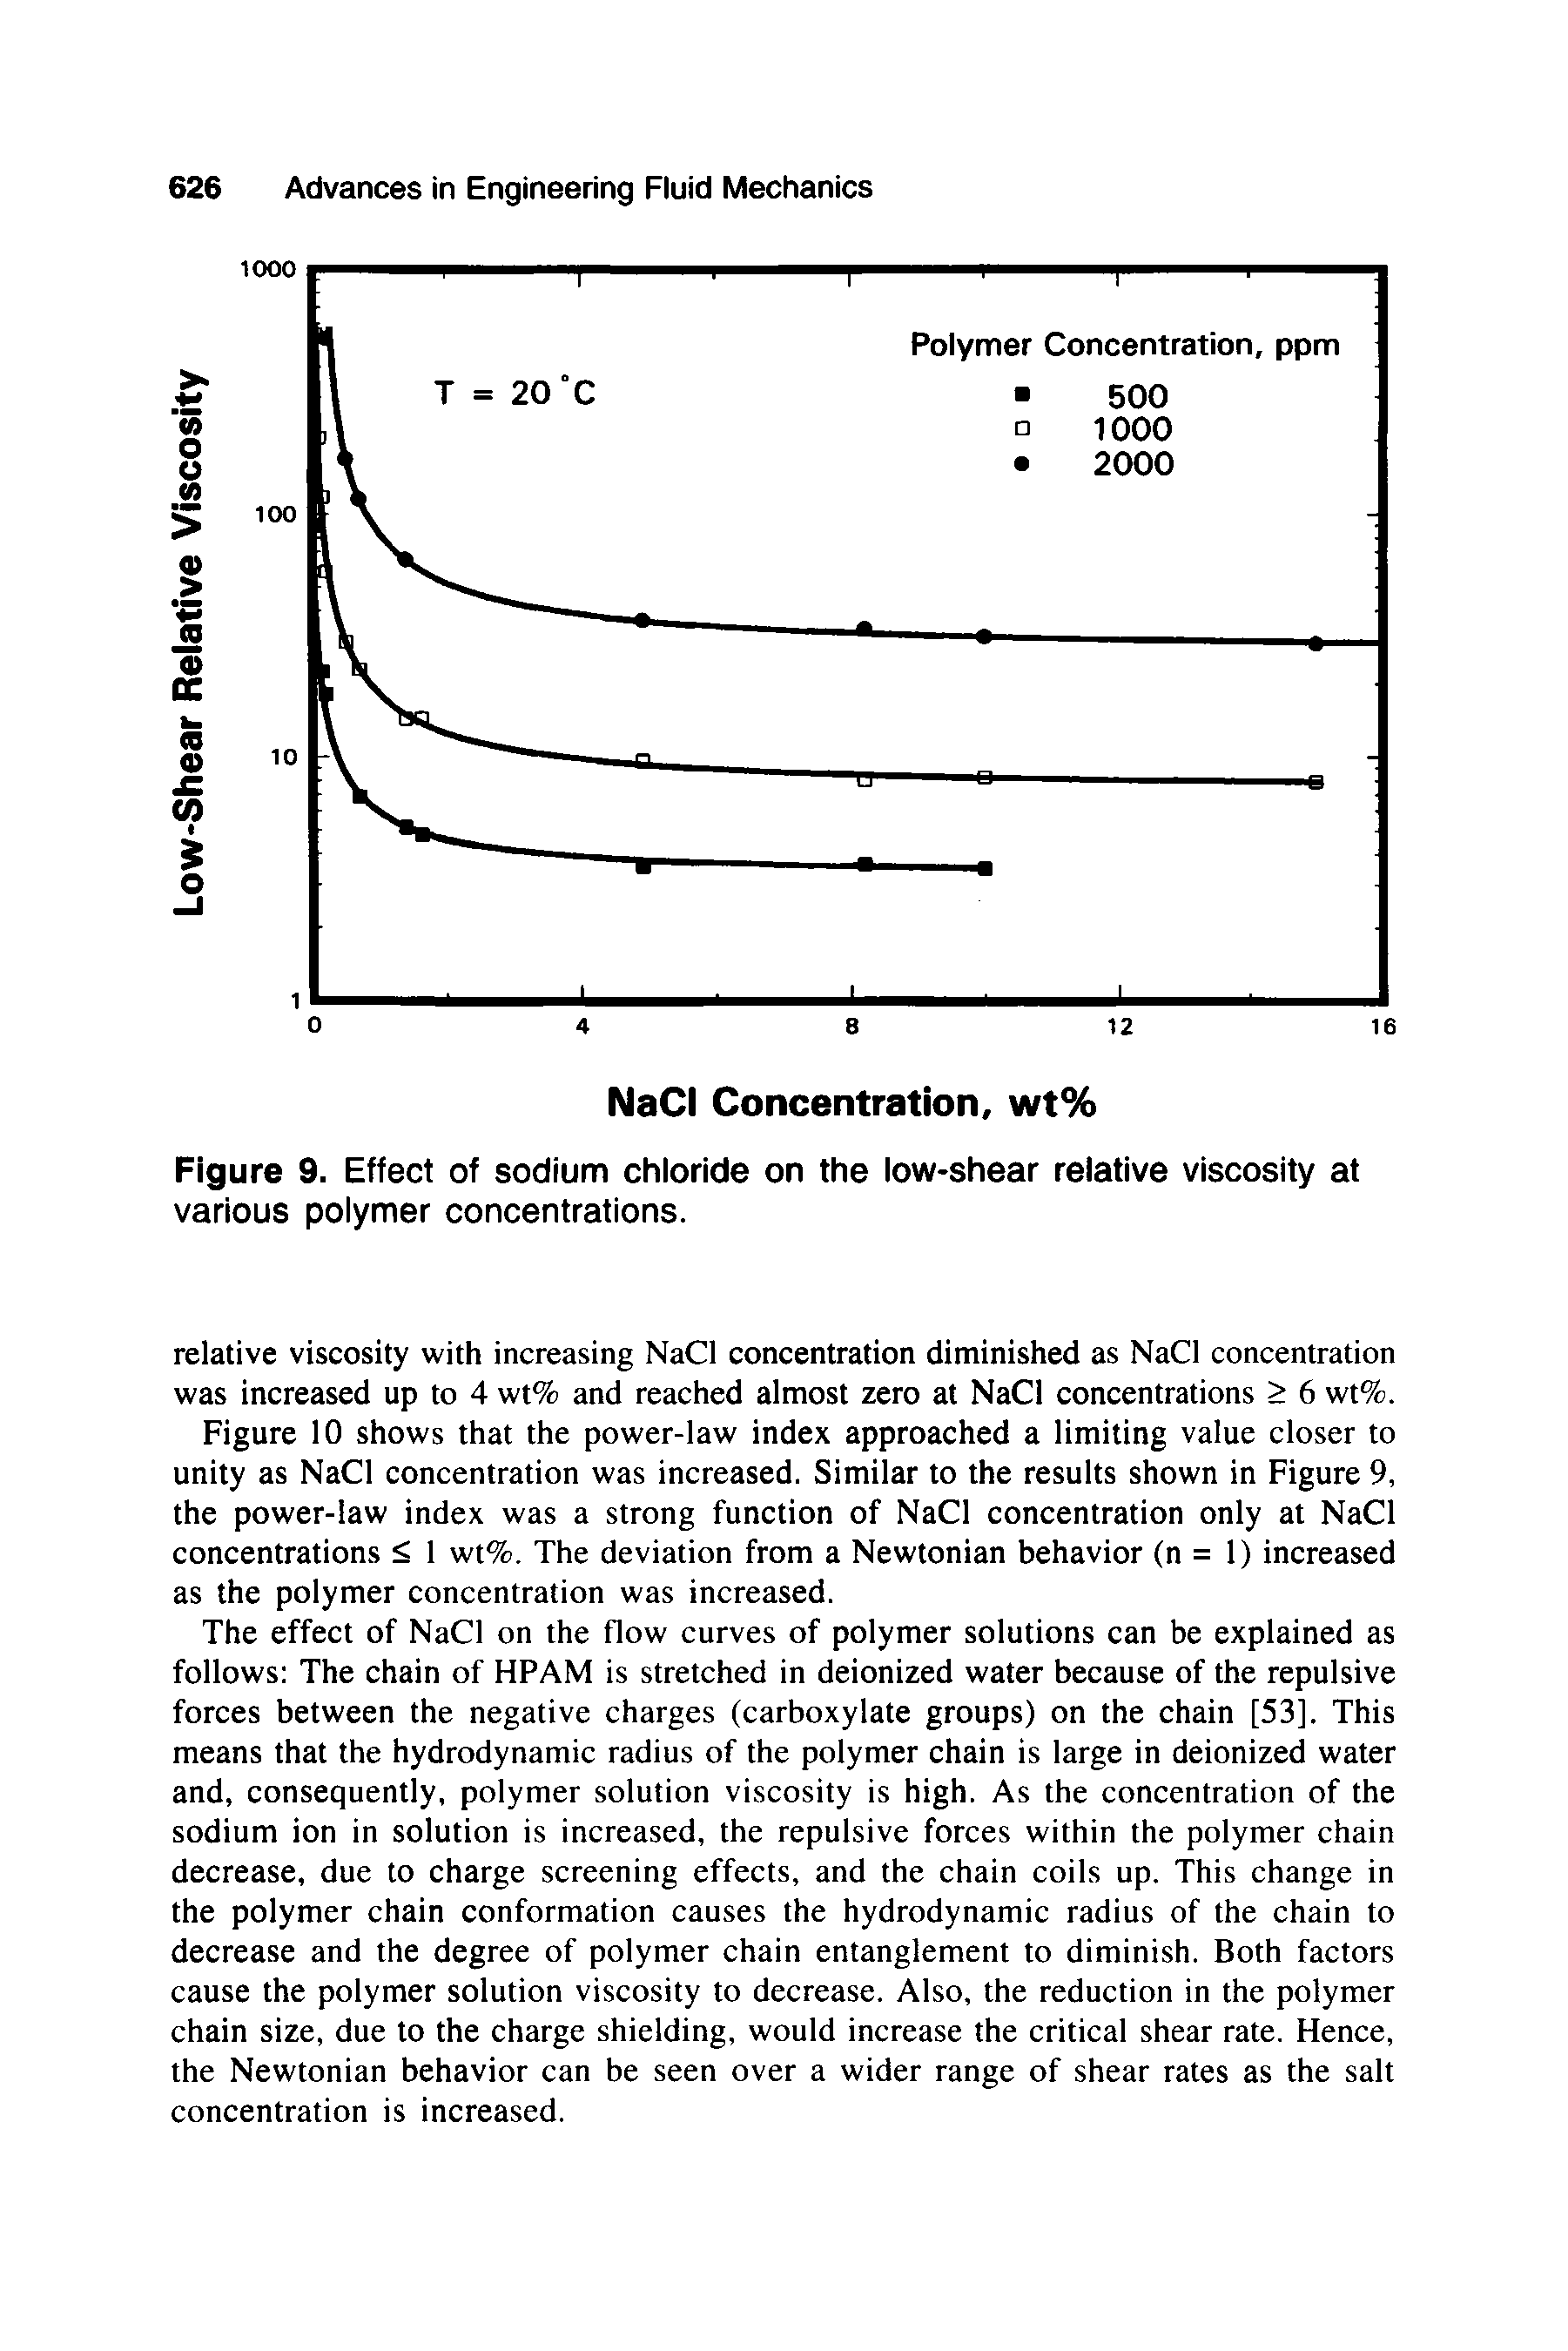 Figure 9. Effect of sodium chloride on the low-shear relative viscosity at various polymer concentrations.